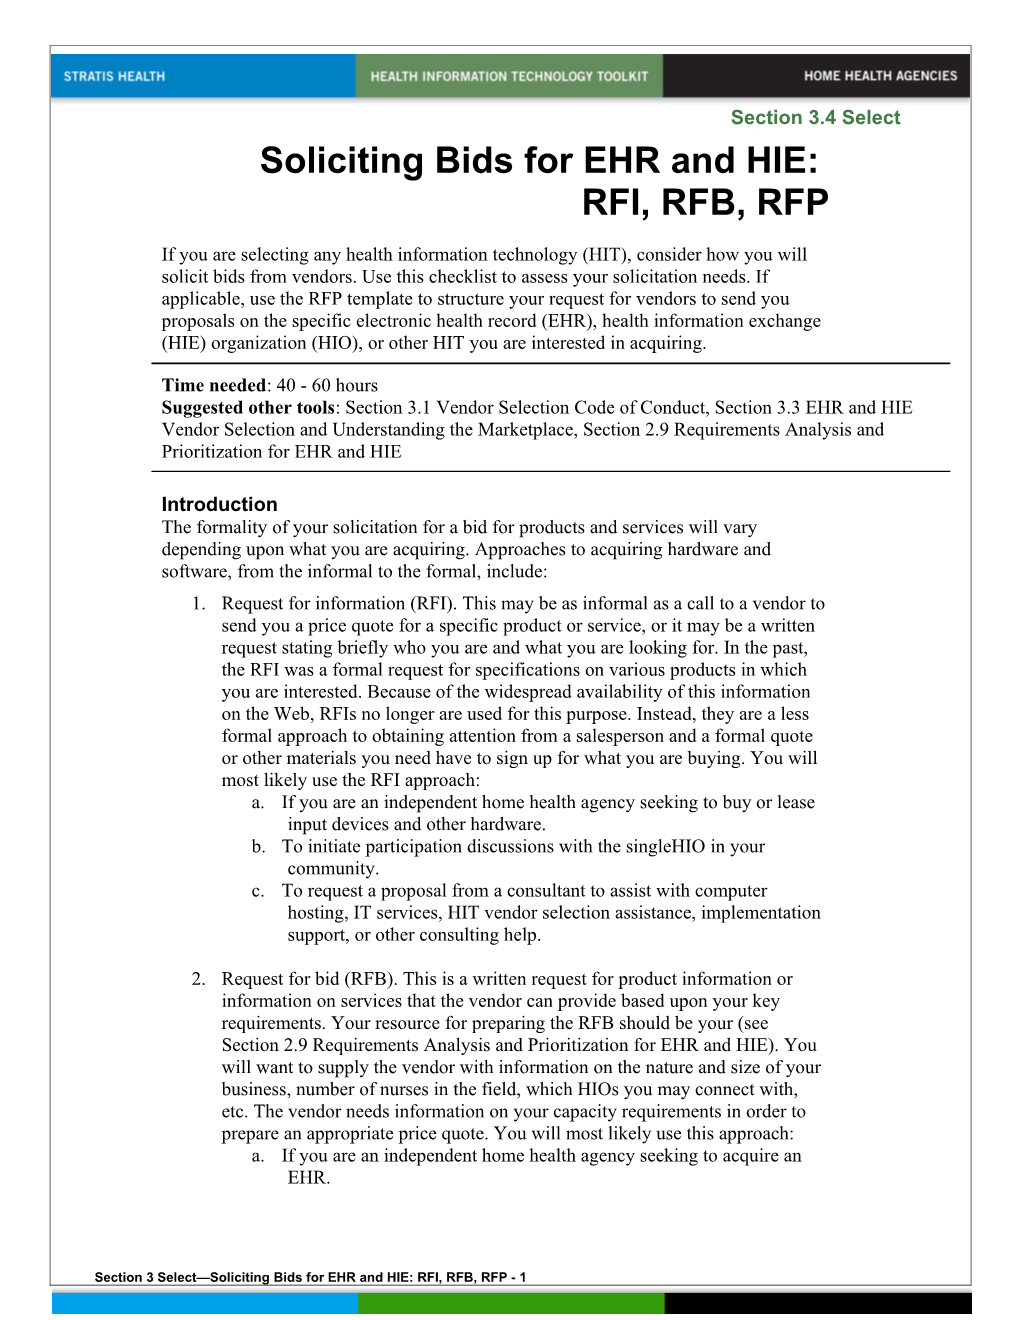 3 Soliciting Bids for EHR and HIE- RFI, RFB, RFP